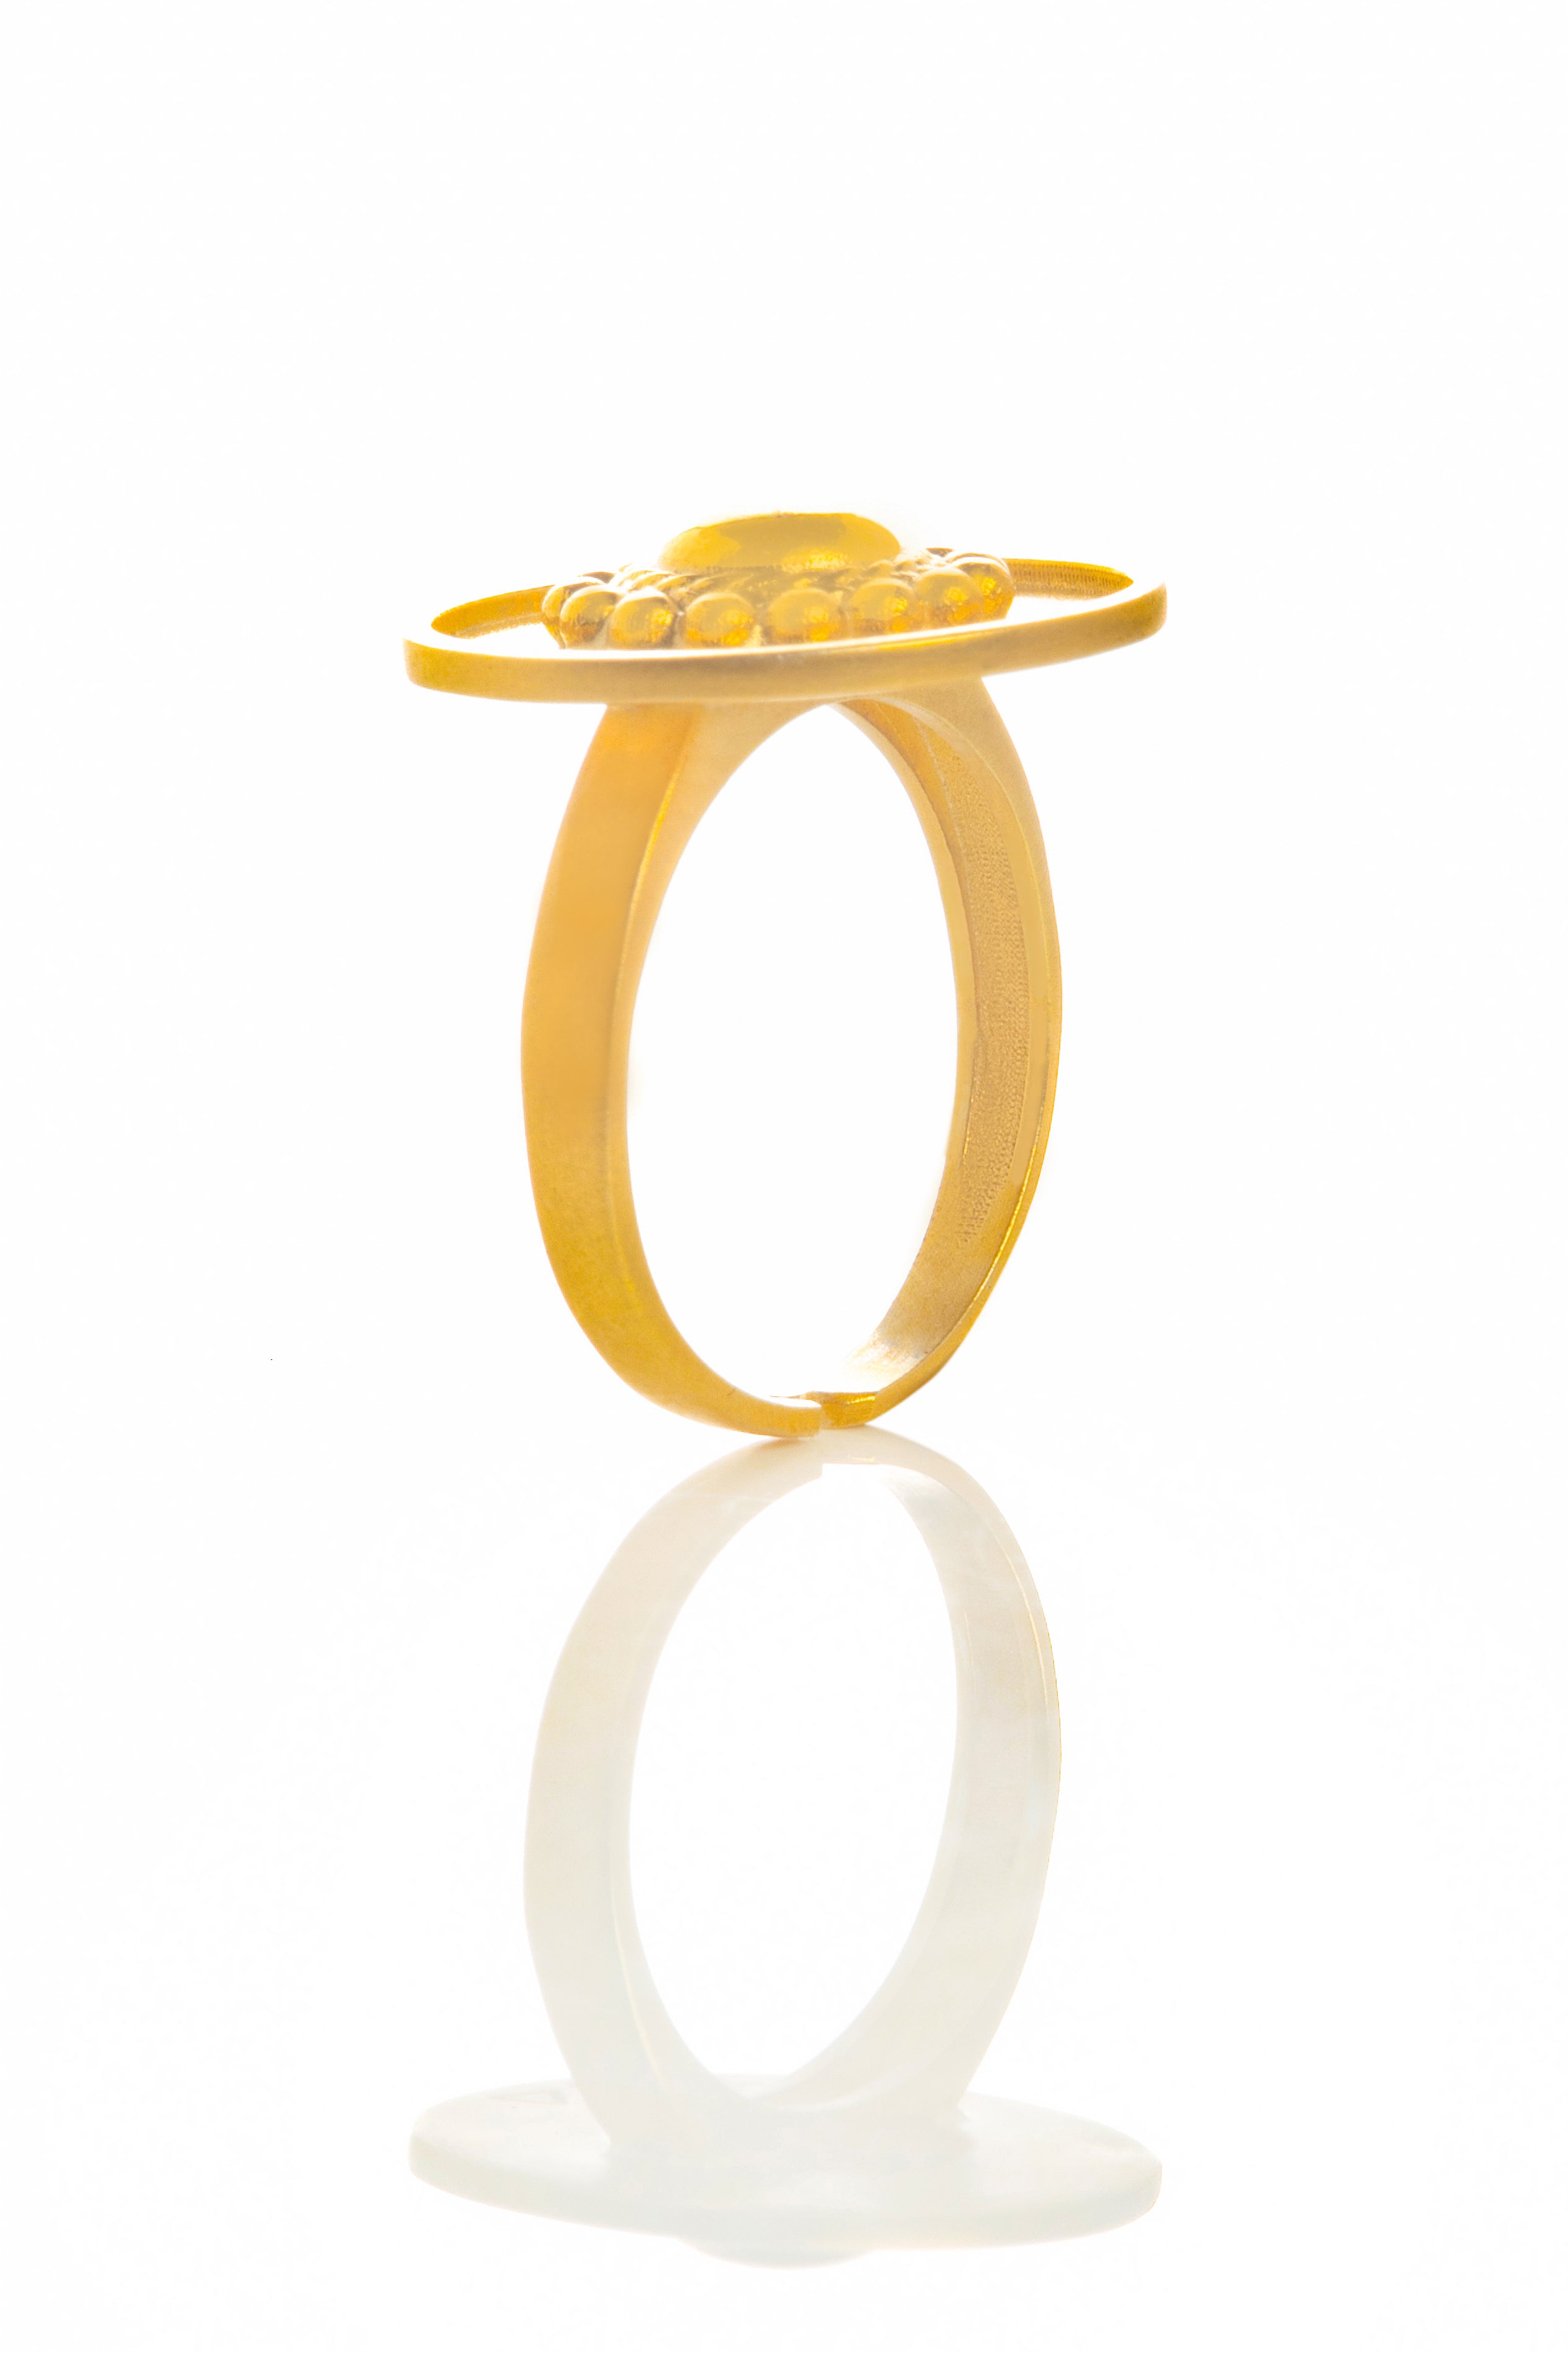 Myrsini ring, silver 925° gold plated 22k by Pearl Martini